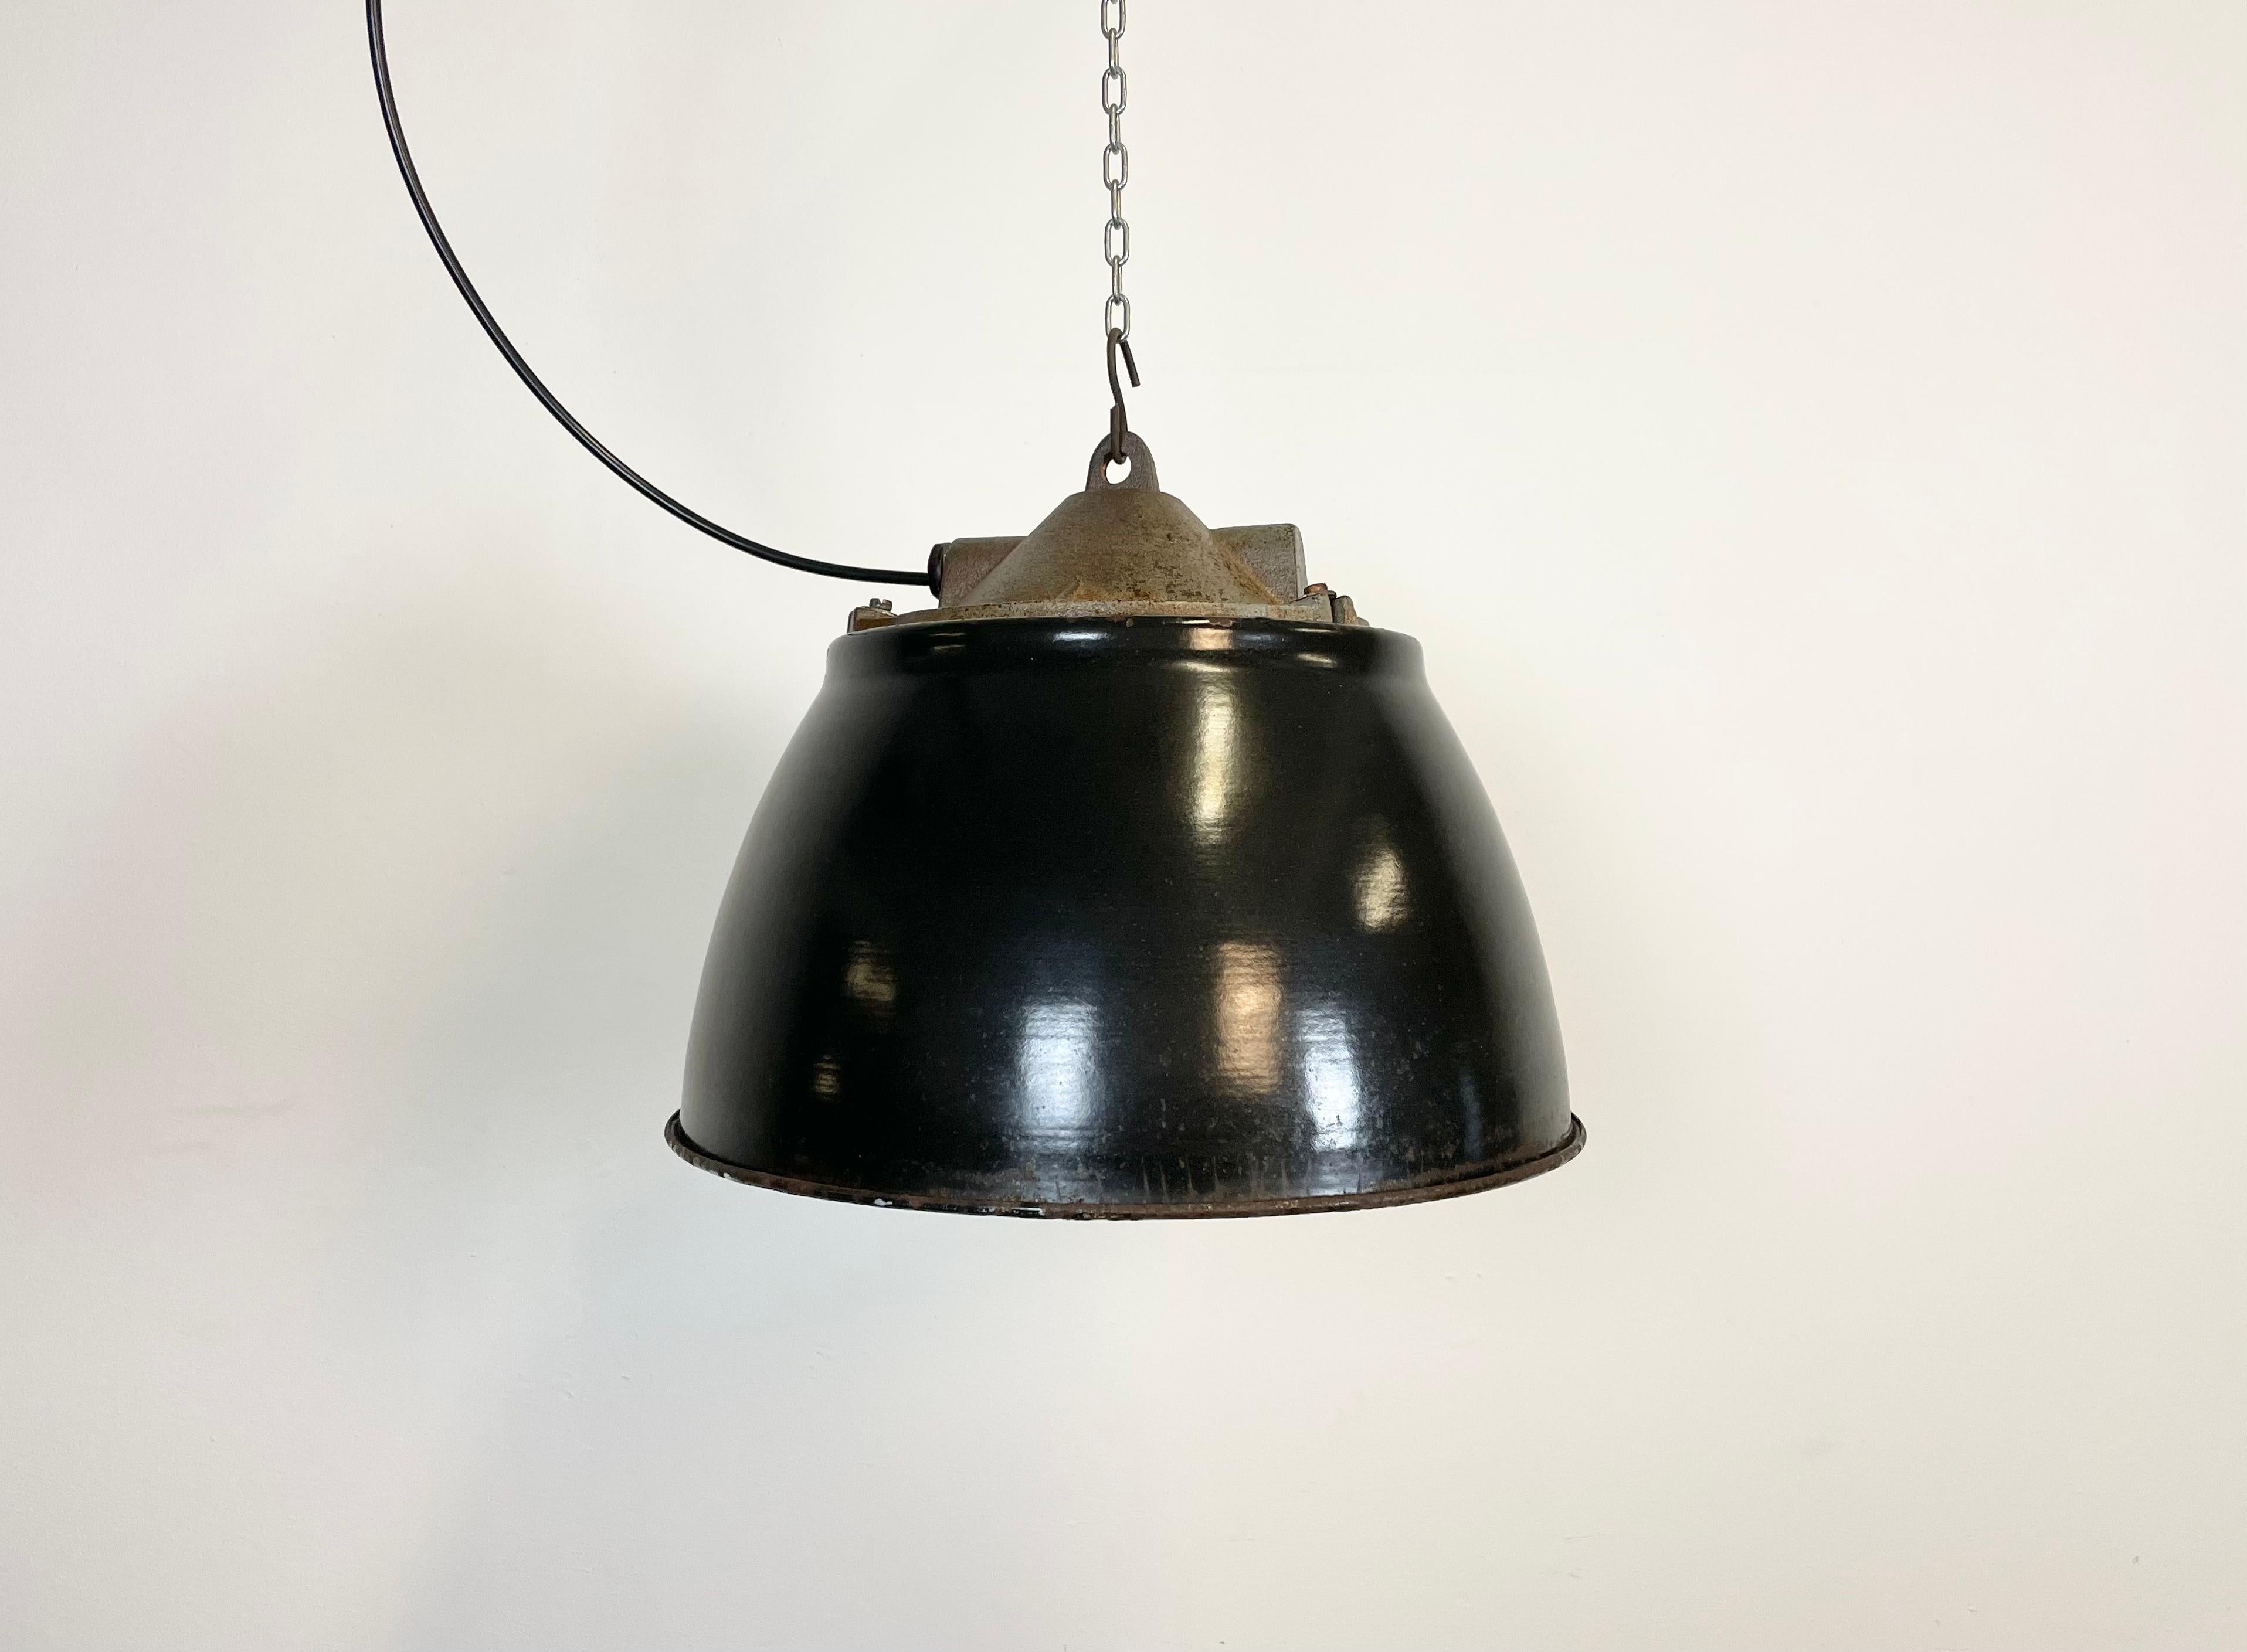 Industrial factory pendant lamp in cast iron made in former Czechoslovakia during the 1950s. It features a black metal enamel shade with white enamel interior, a striped glass and an iron cage. The porcelain socket requires E 27 light bulbs. New